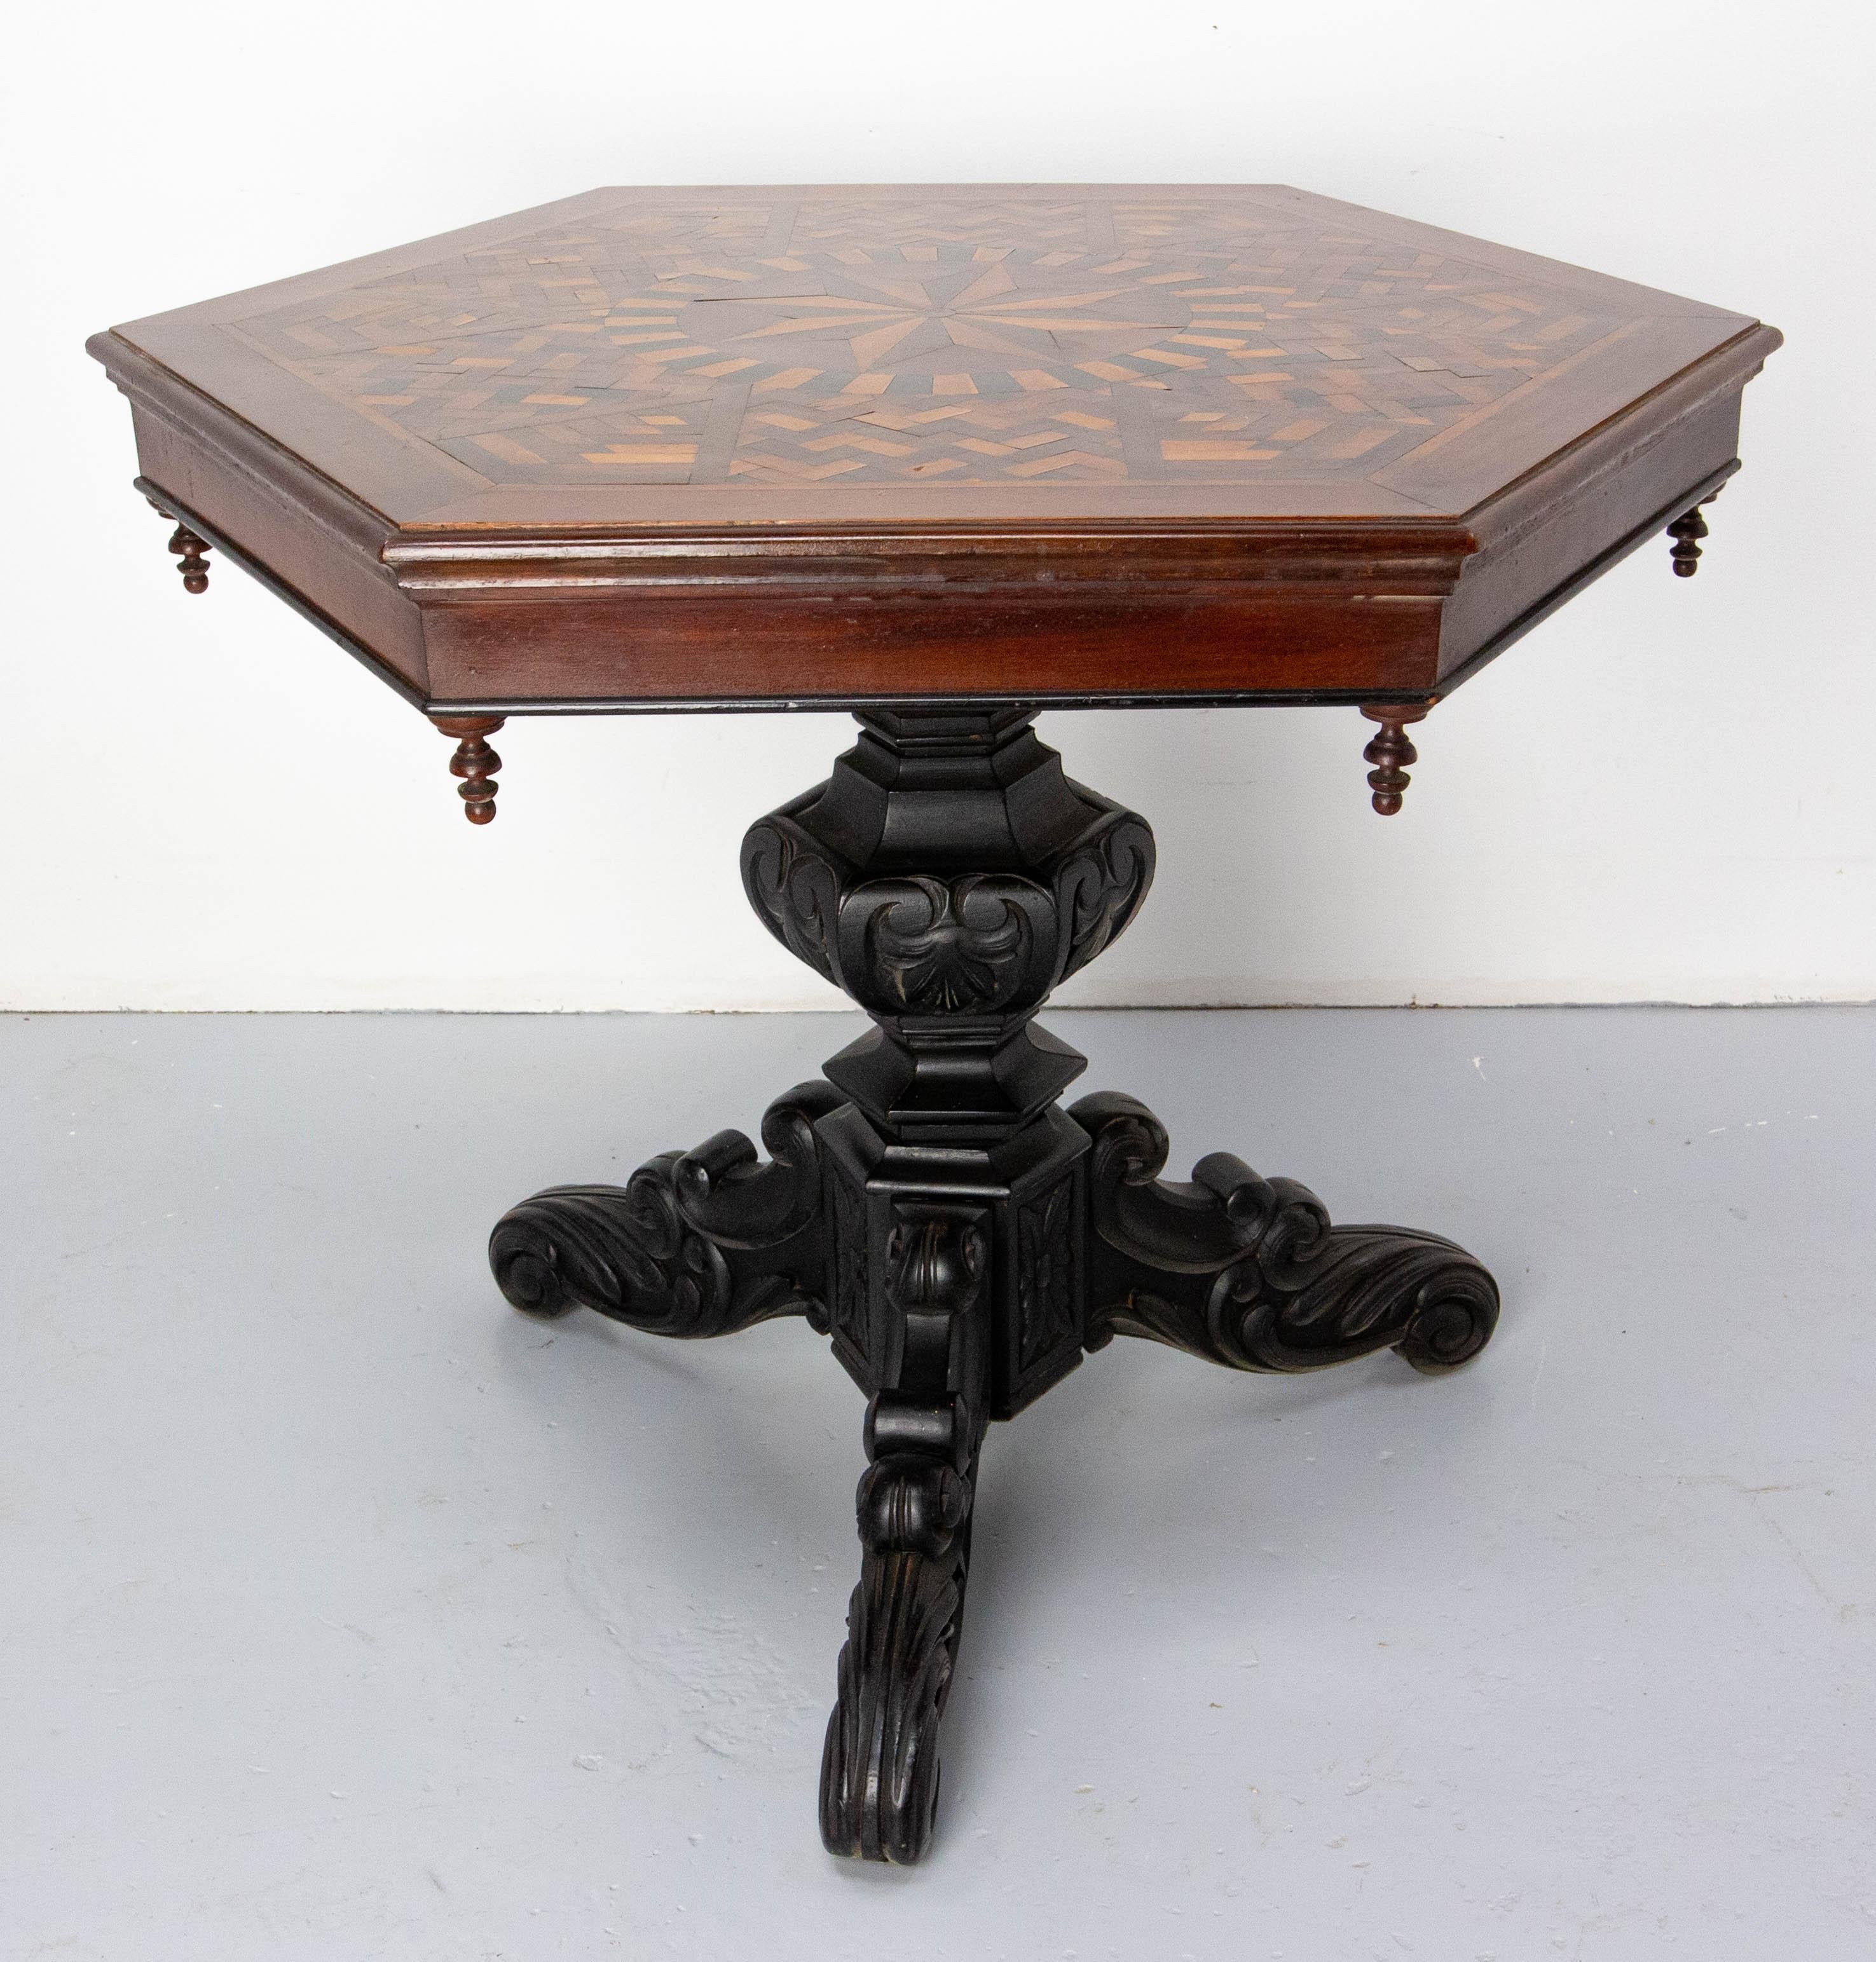 Ebonized pedestal table with maquetry top,
Moroccan side table, late 19th century.
Good antique condition with signs of use.

Shipping:
75 / 87 / 70 cm 22 kg.